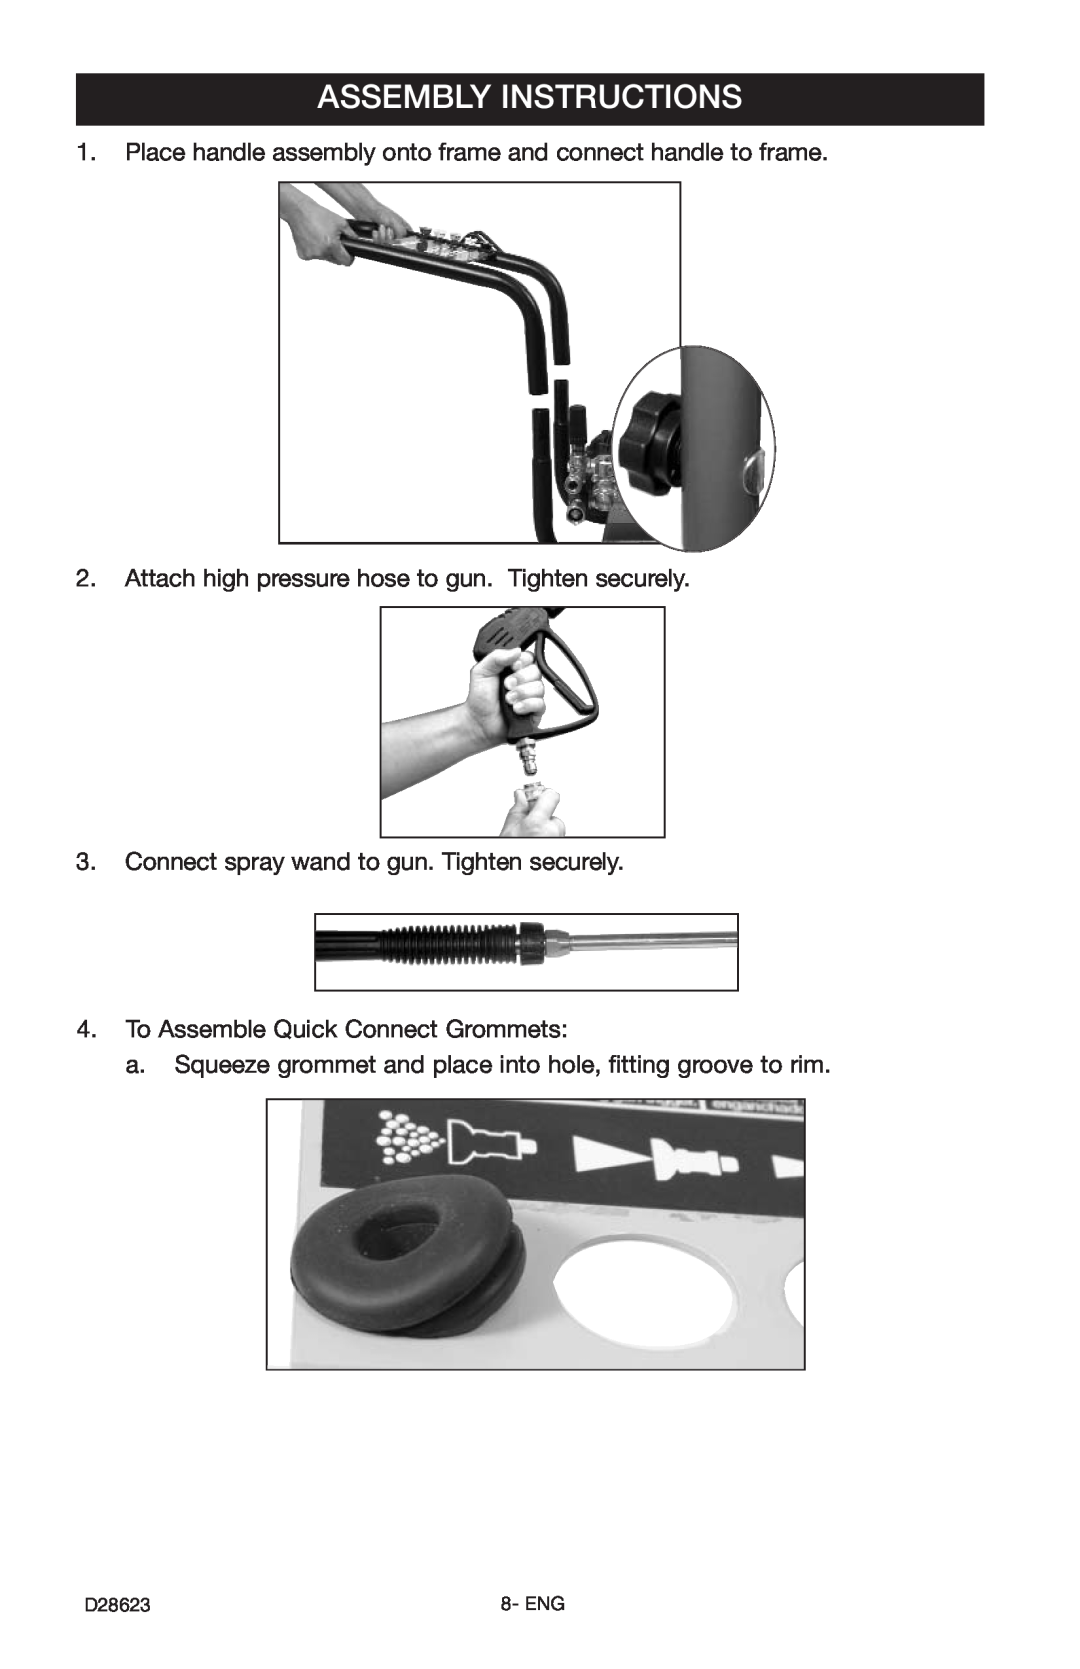 Delta D28623 instruction manual Assembly Instructions, Place handle assembly onto frame and connect handle to frame 